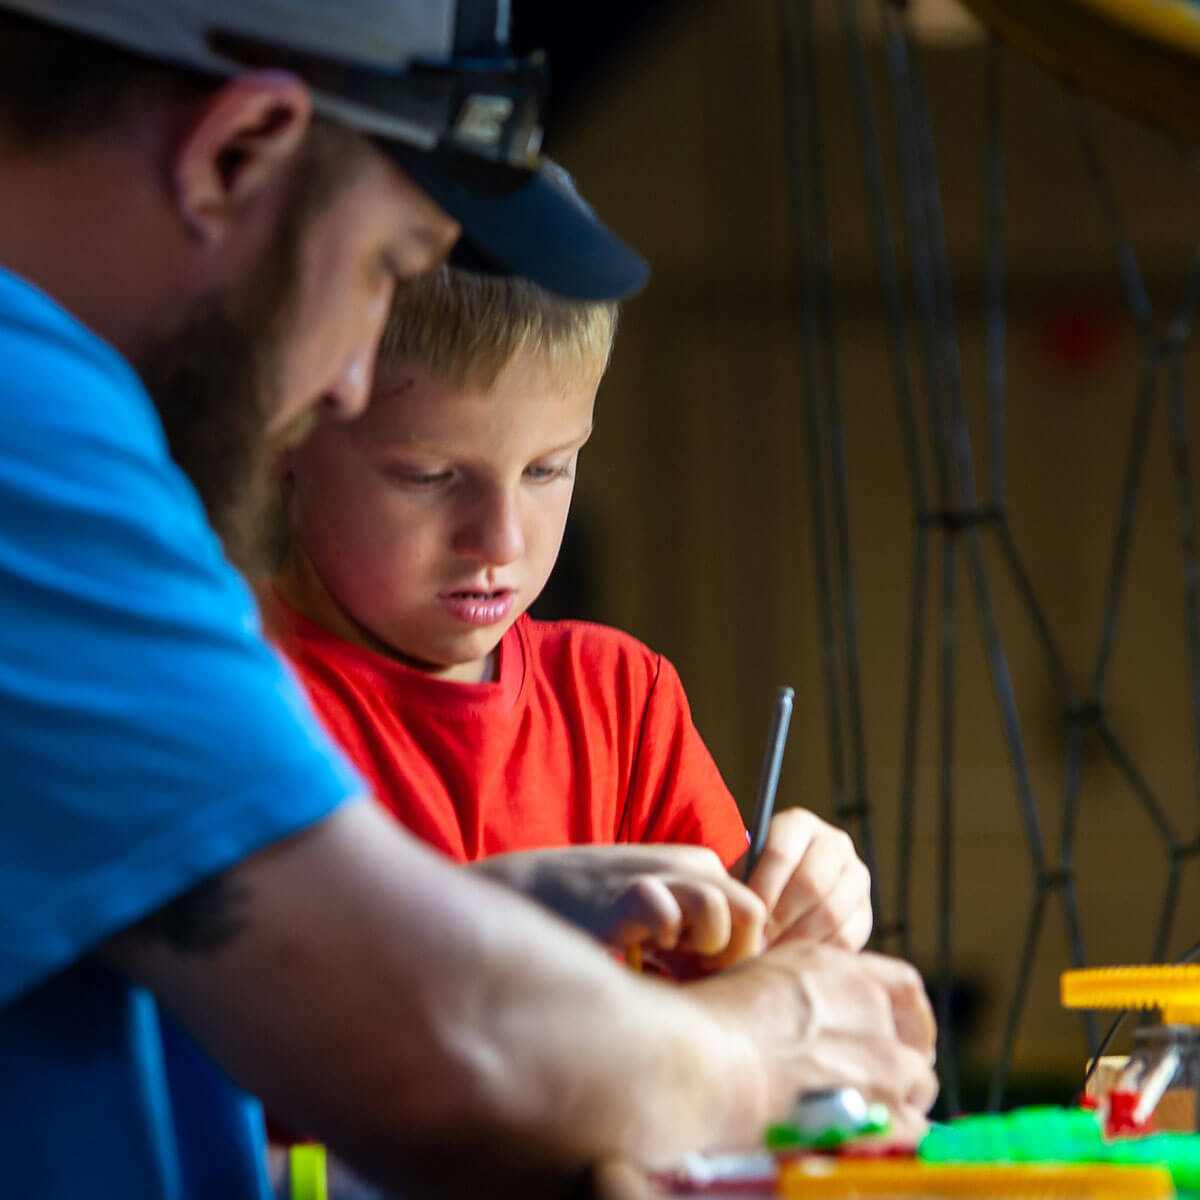 A child plays with KNex at Wonderlab while an ad